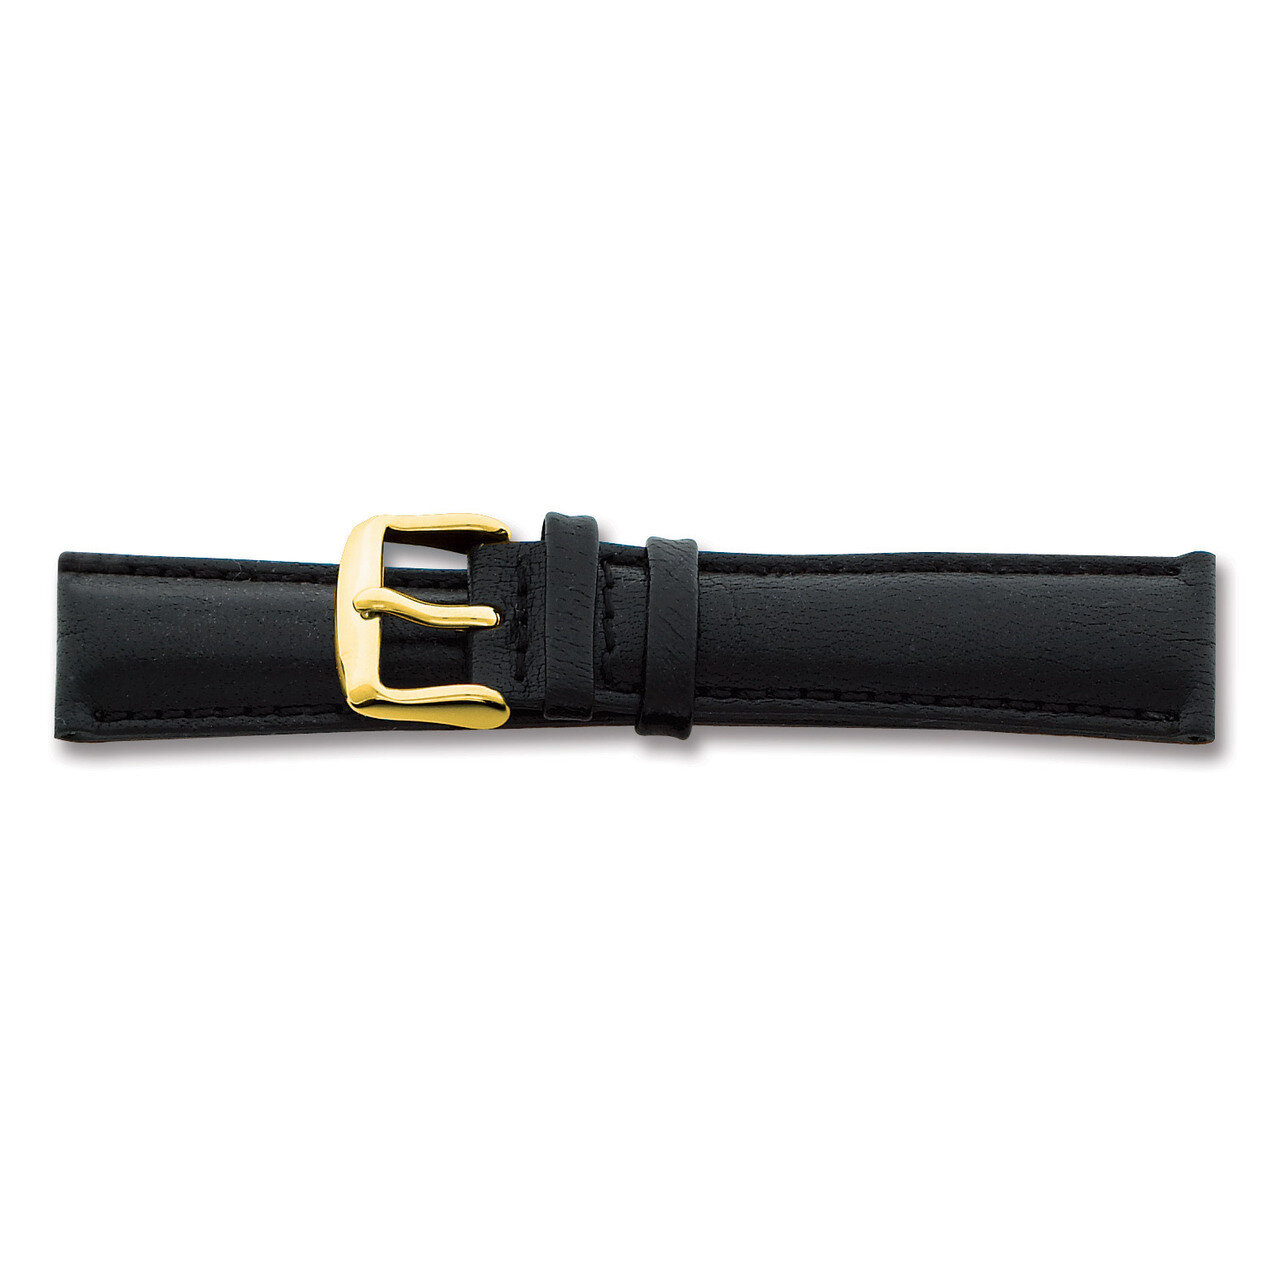 22mm Long Black Leather Chrono Buckle Watch Band 8.5 Inch Gold-tone BAY141L-22